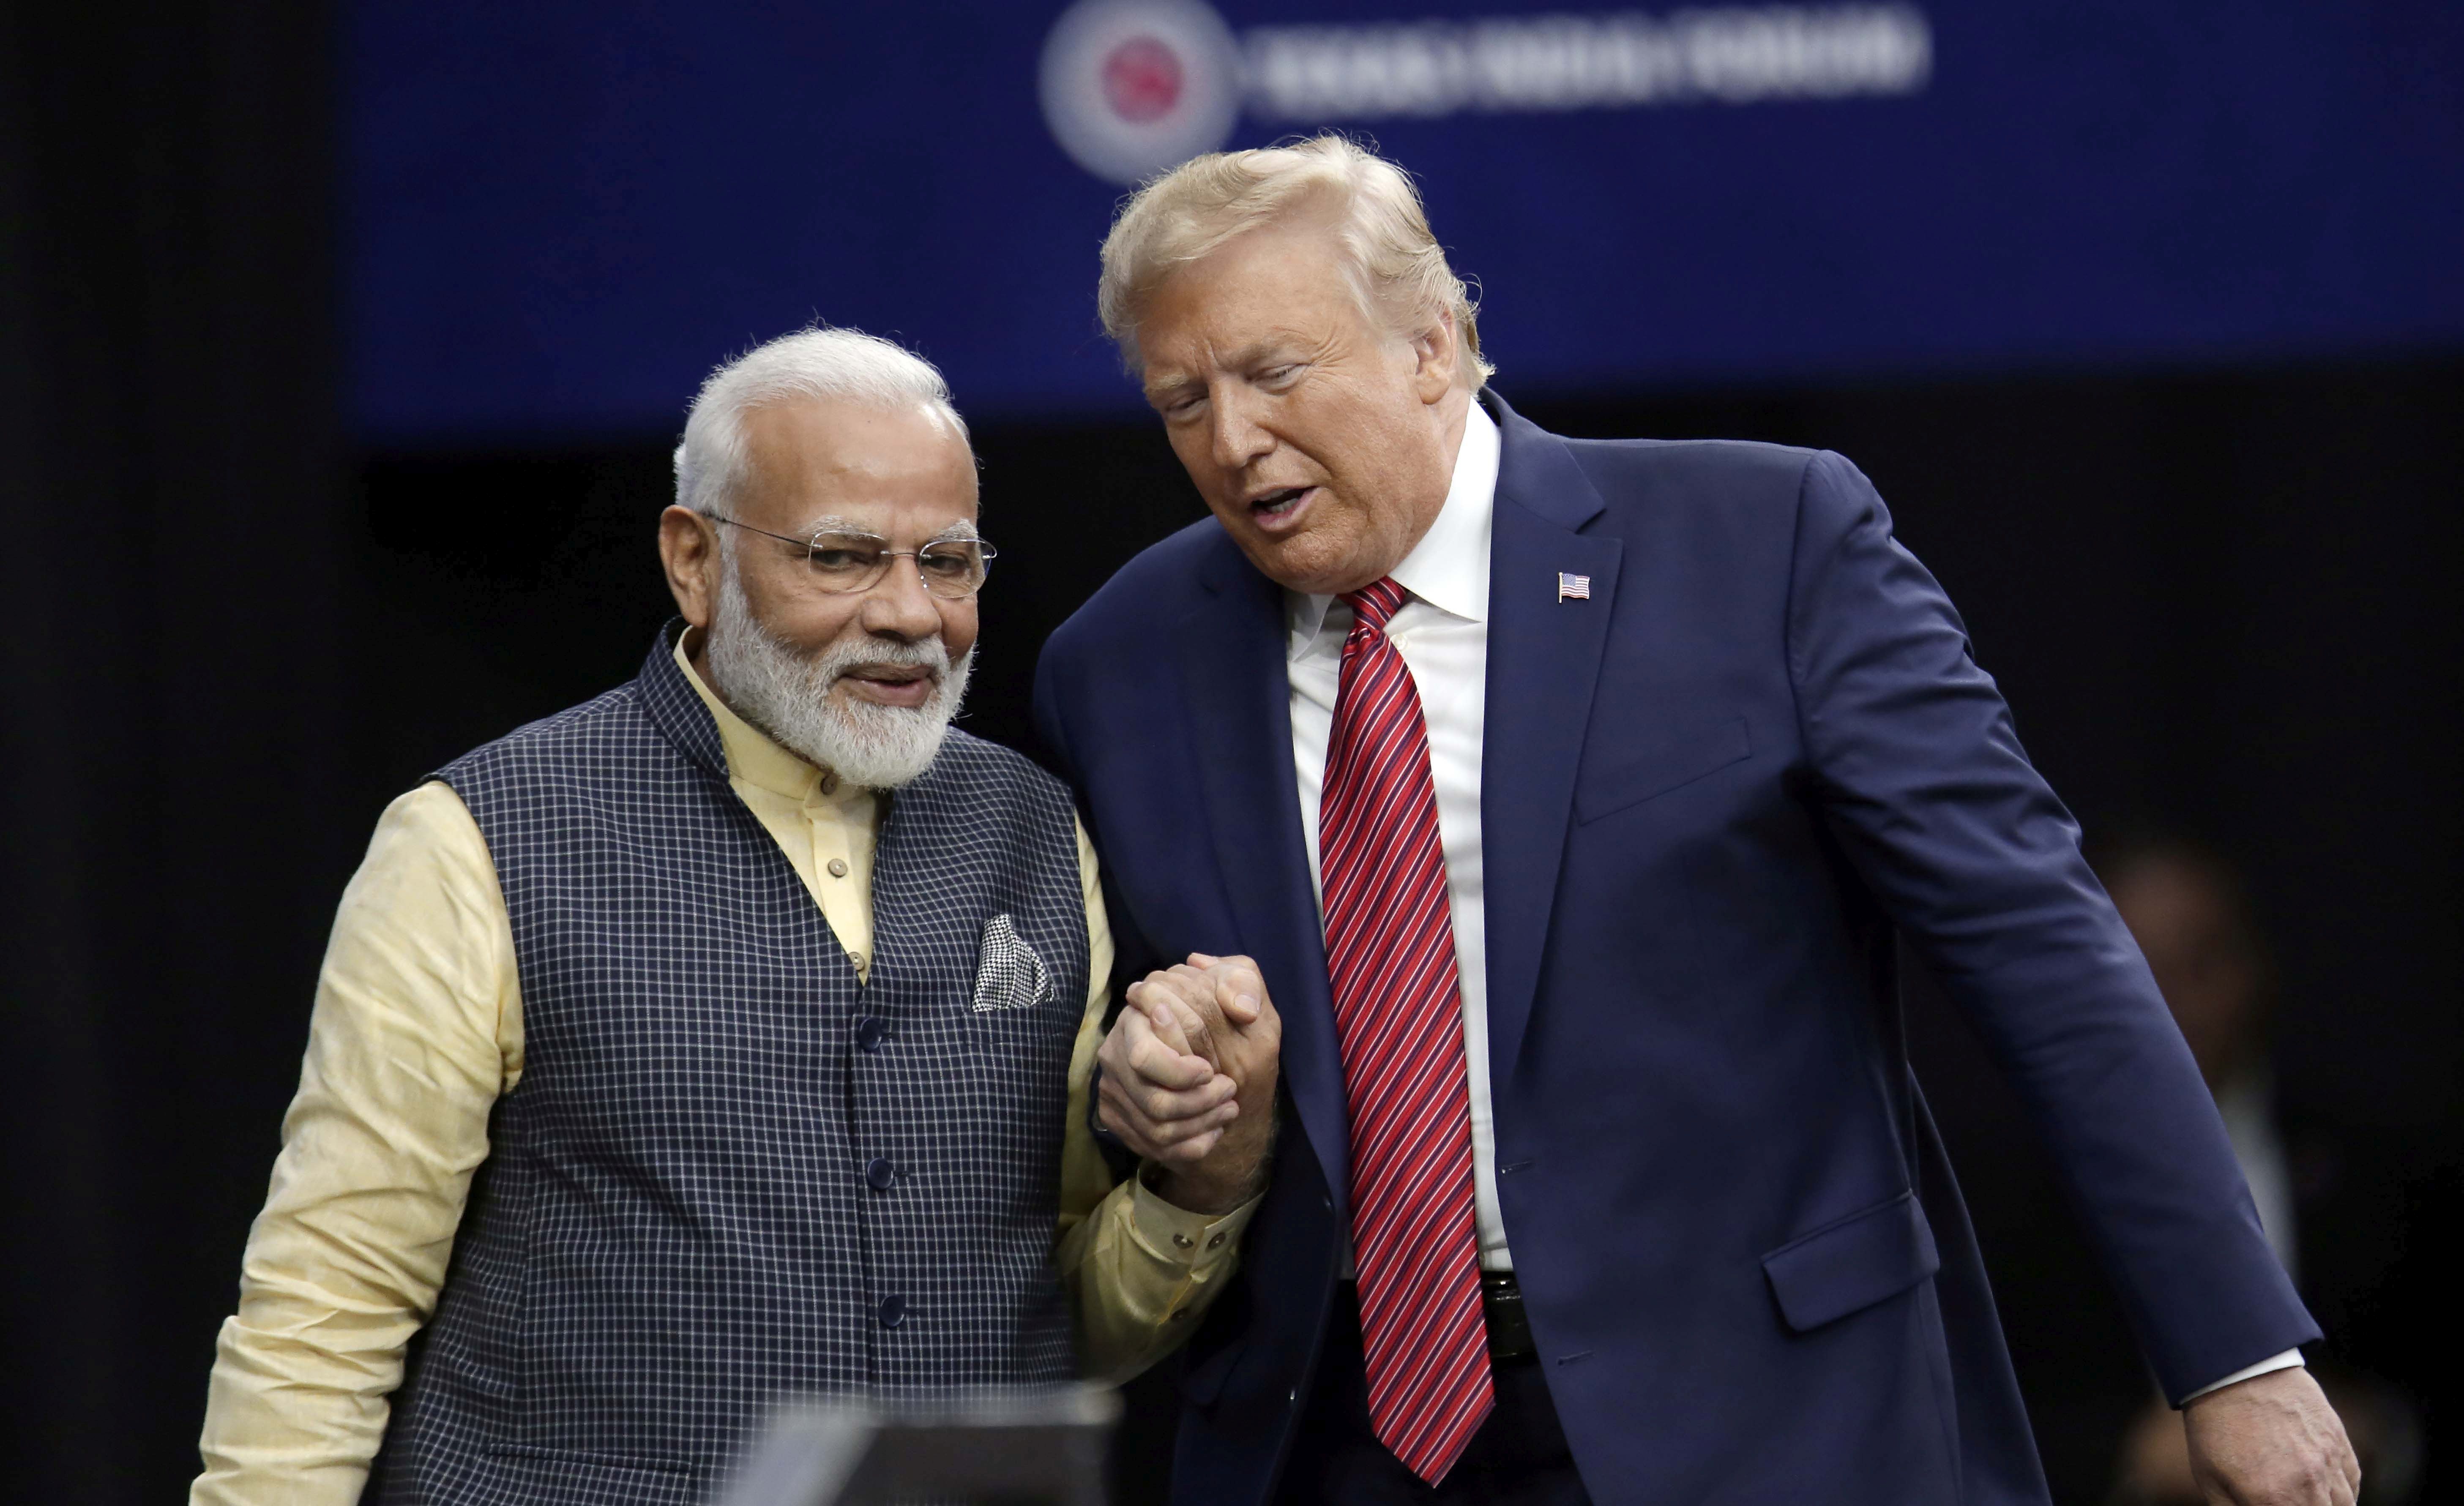 Full marks to Trump for guest appearance in opera starring Modi